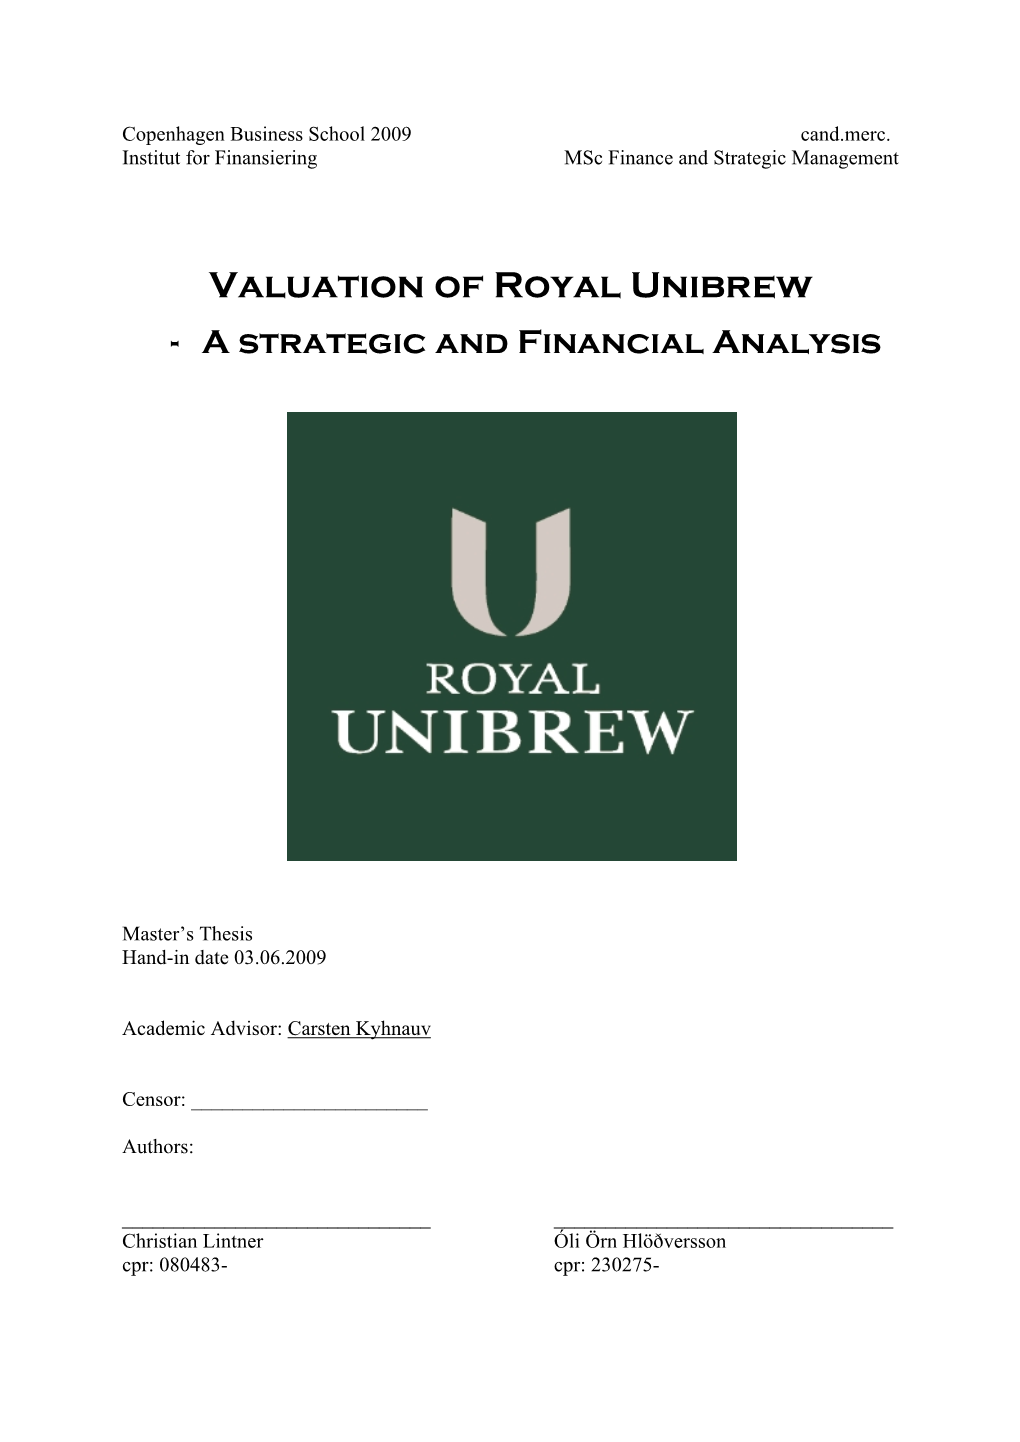 Valuation of Royal Unibrew - a Strategic and Financial Analysis